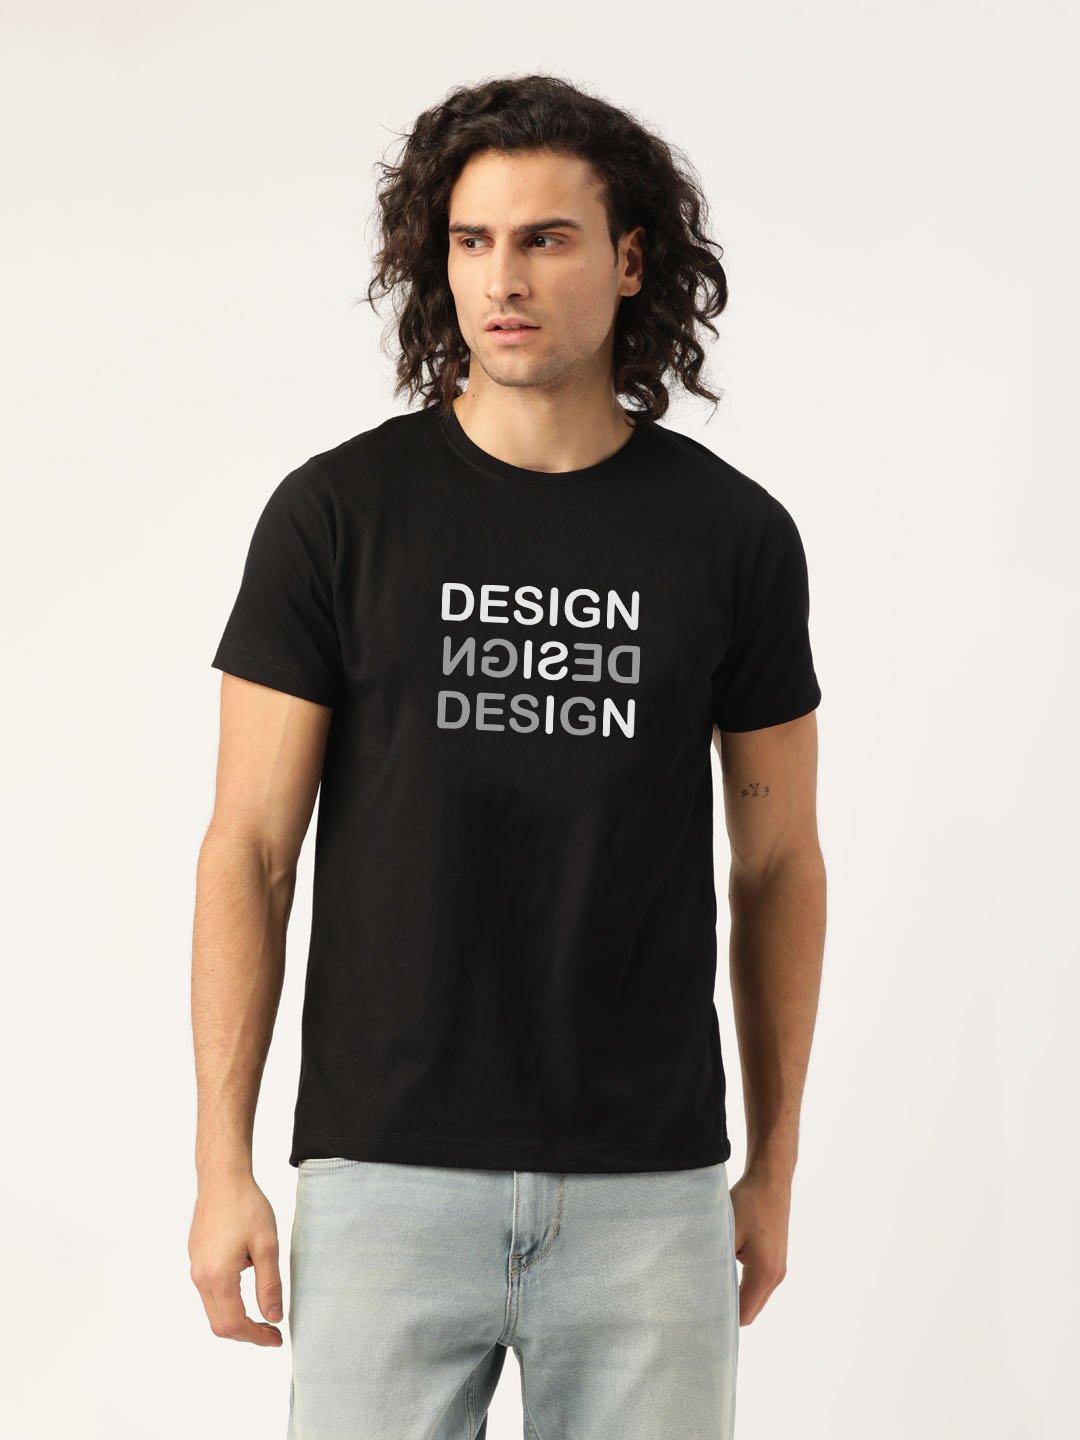 A close-up of a HinglishWear t-shirt with the text "design is design" printed on it. Title